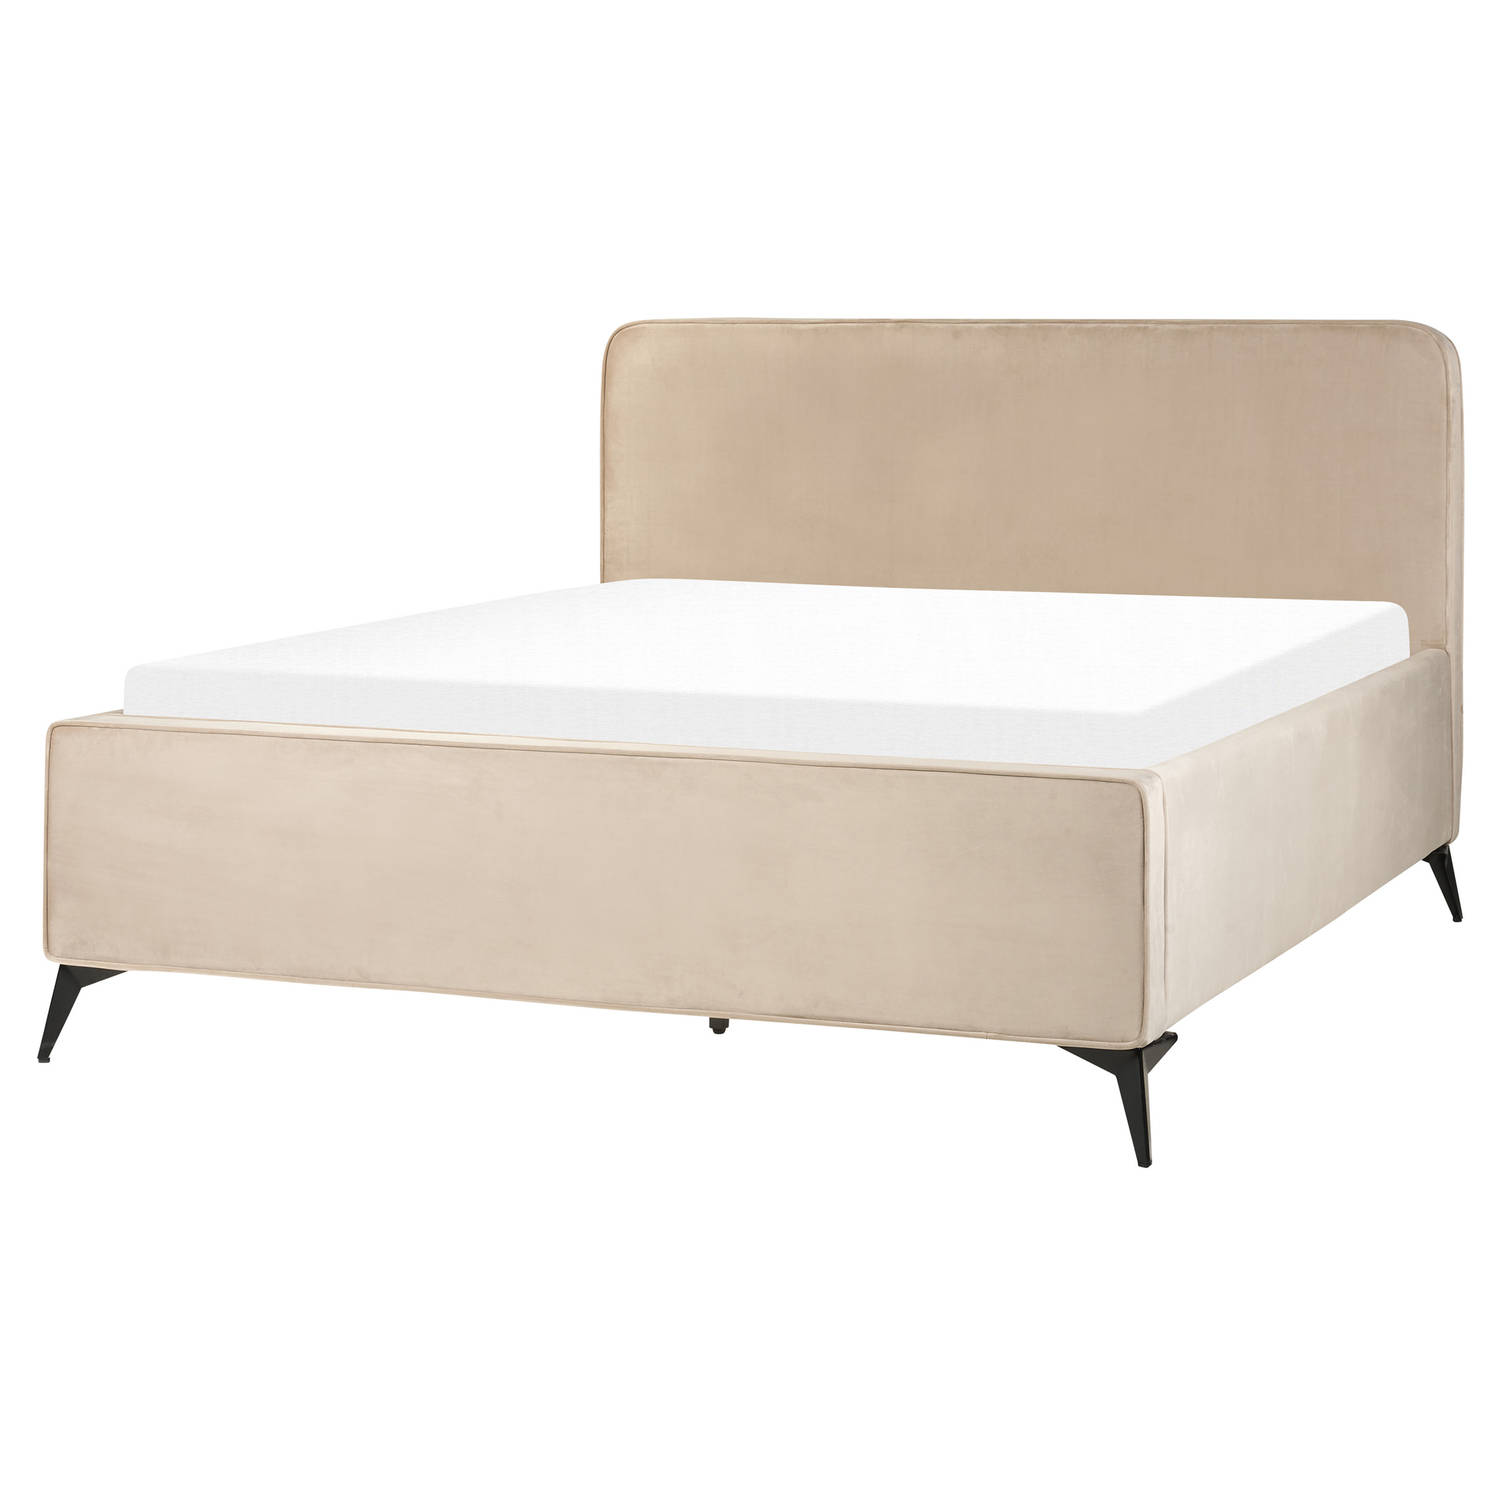 VALOGNES - Tweepersoonsbed - Taupe - 160 x 200 cm - Fluweel